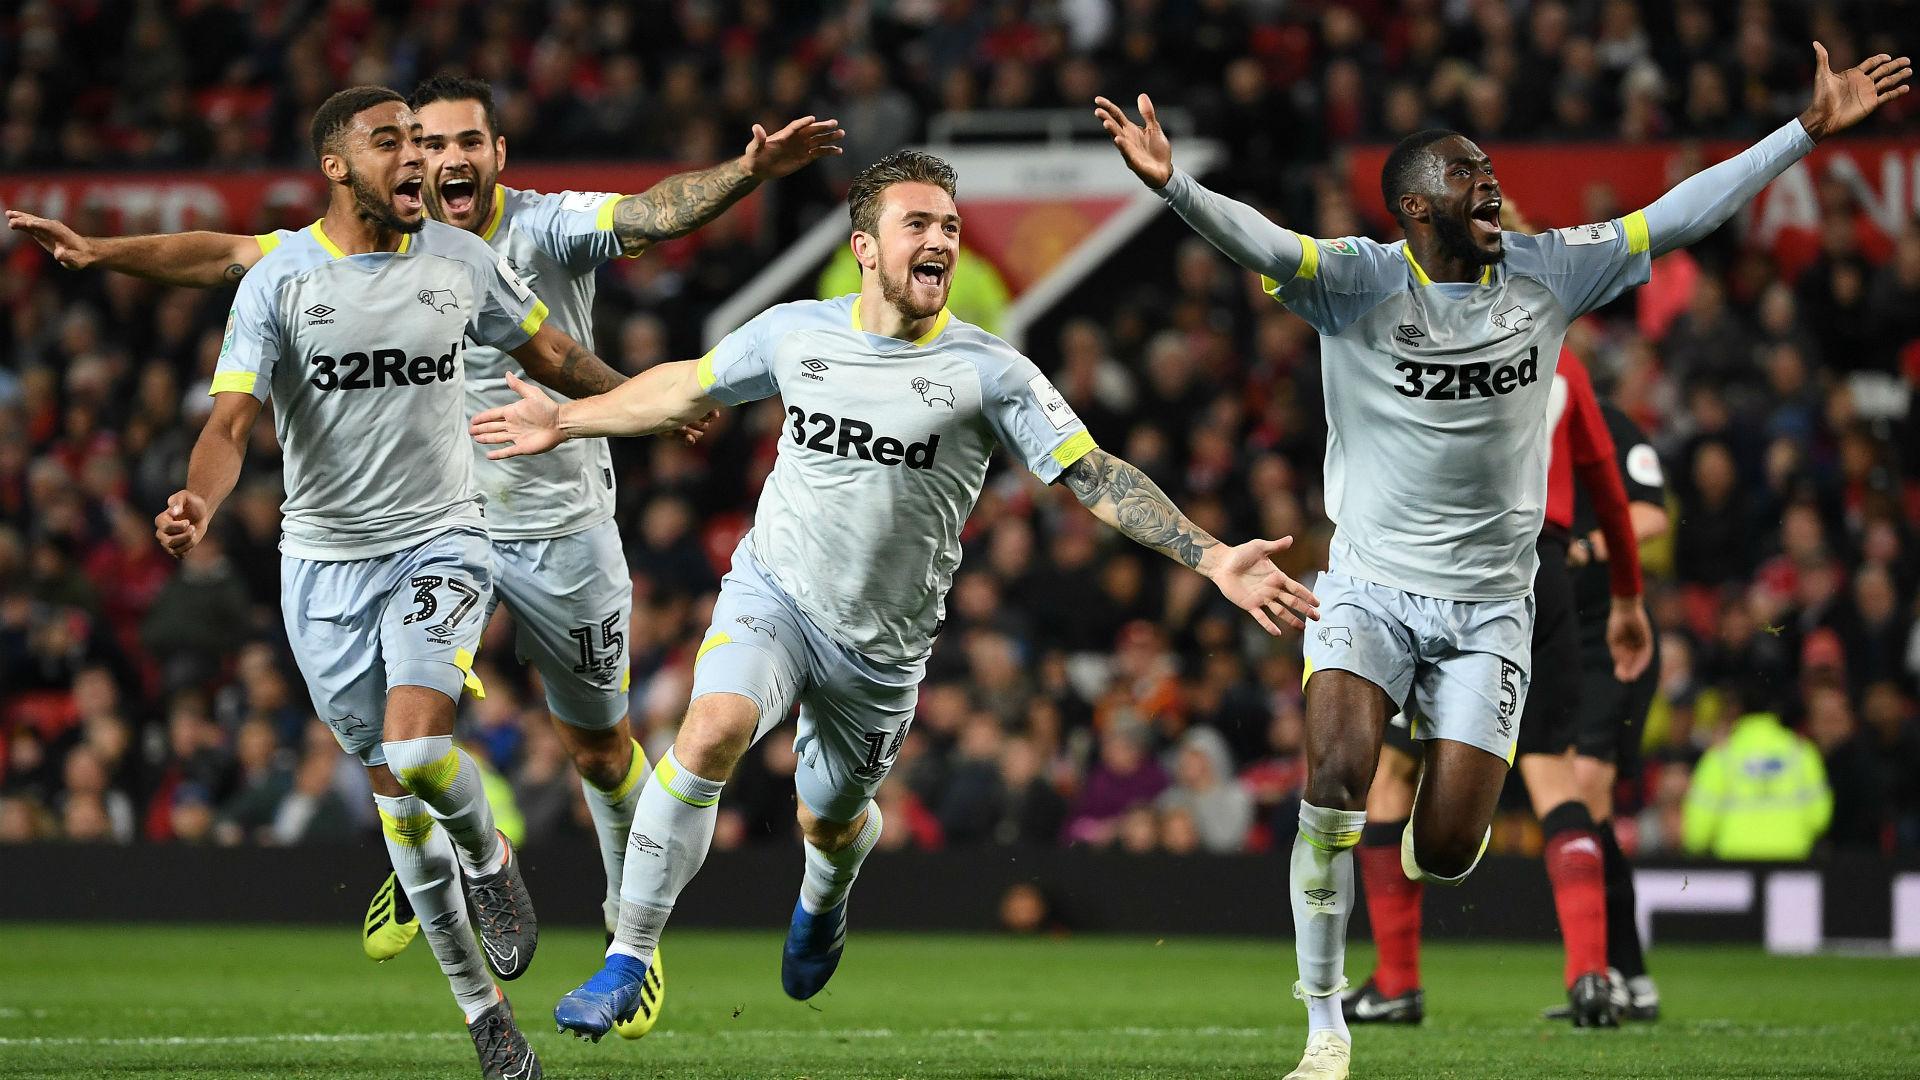 jack marriott derby county manchester united league cup Derby County knocked Manchester United out of the EFL Cup on penalties